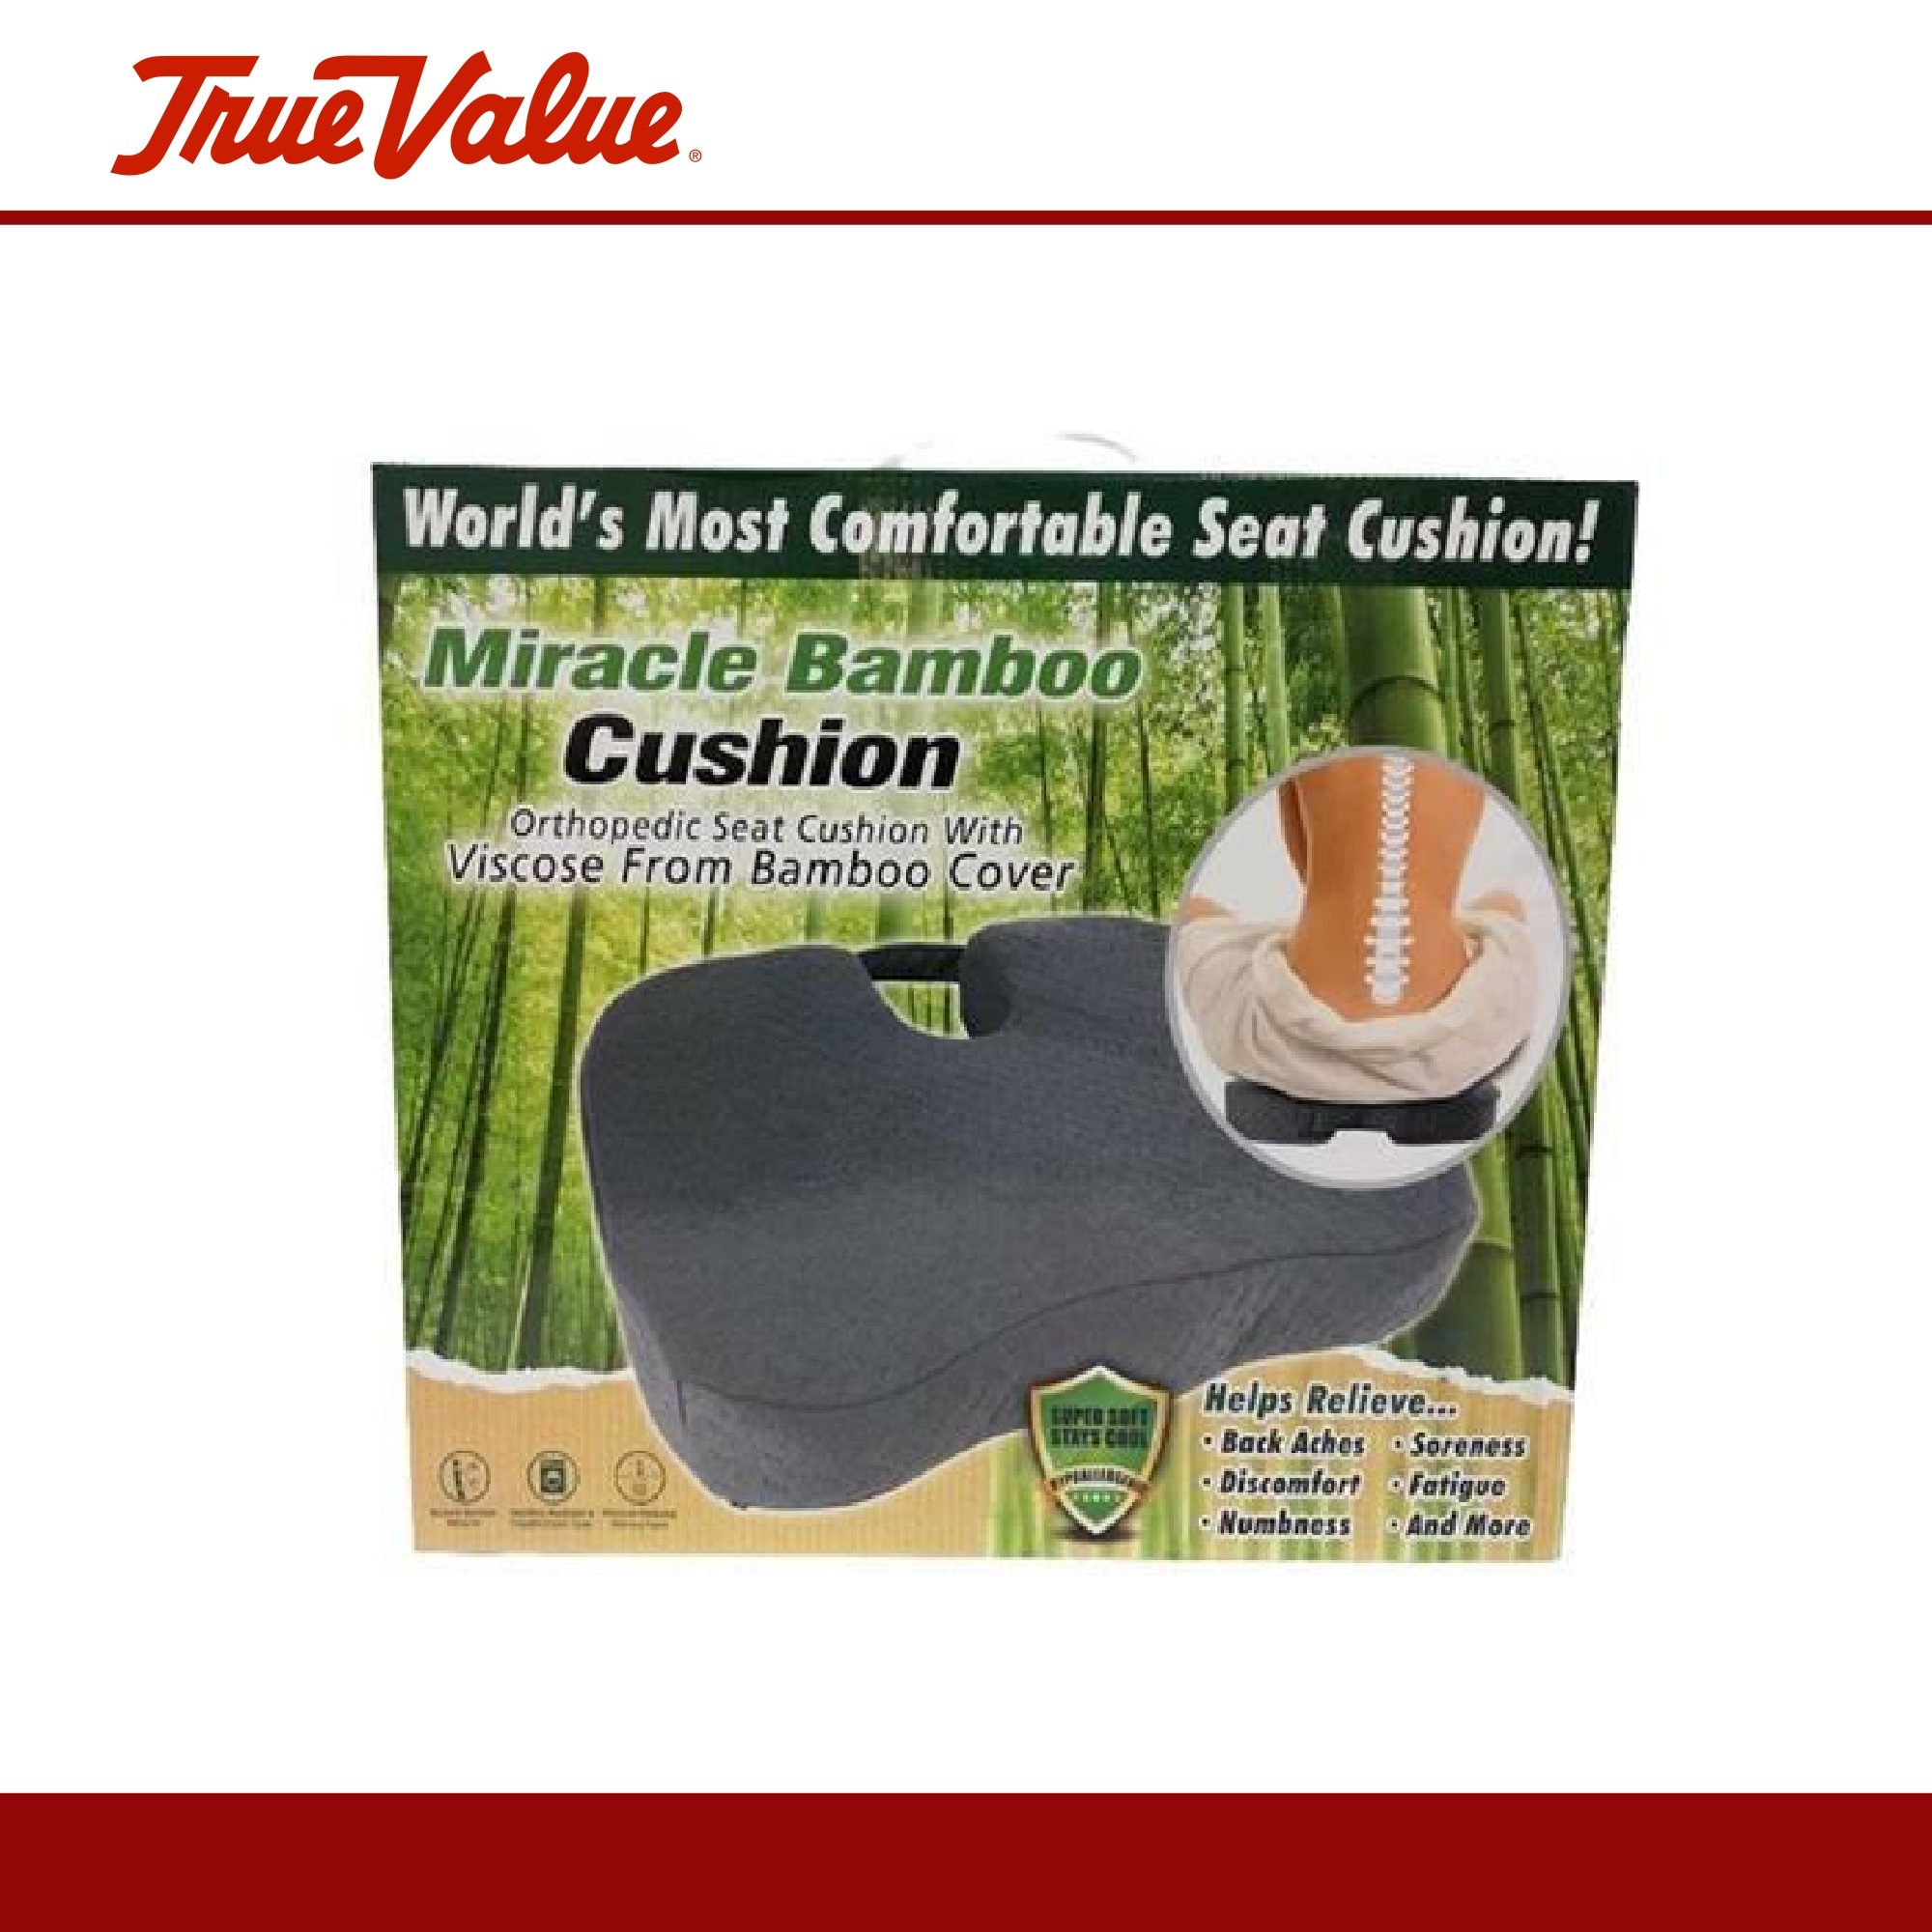 Miracle Bamboo Orthopedic Cushion | Collections Etc.